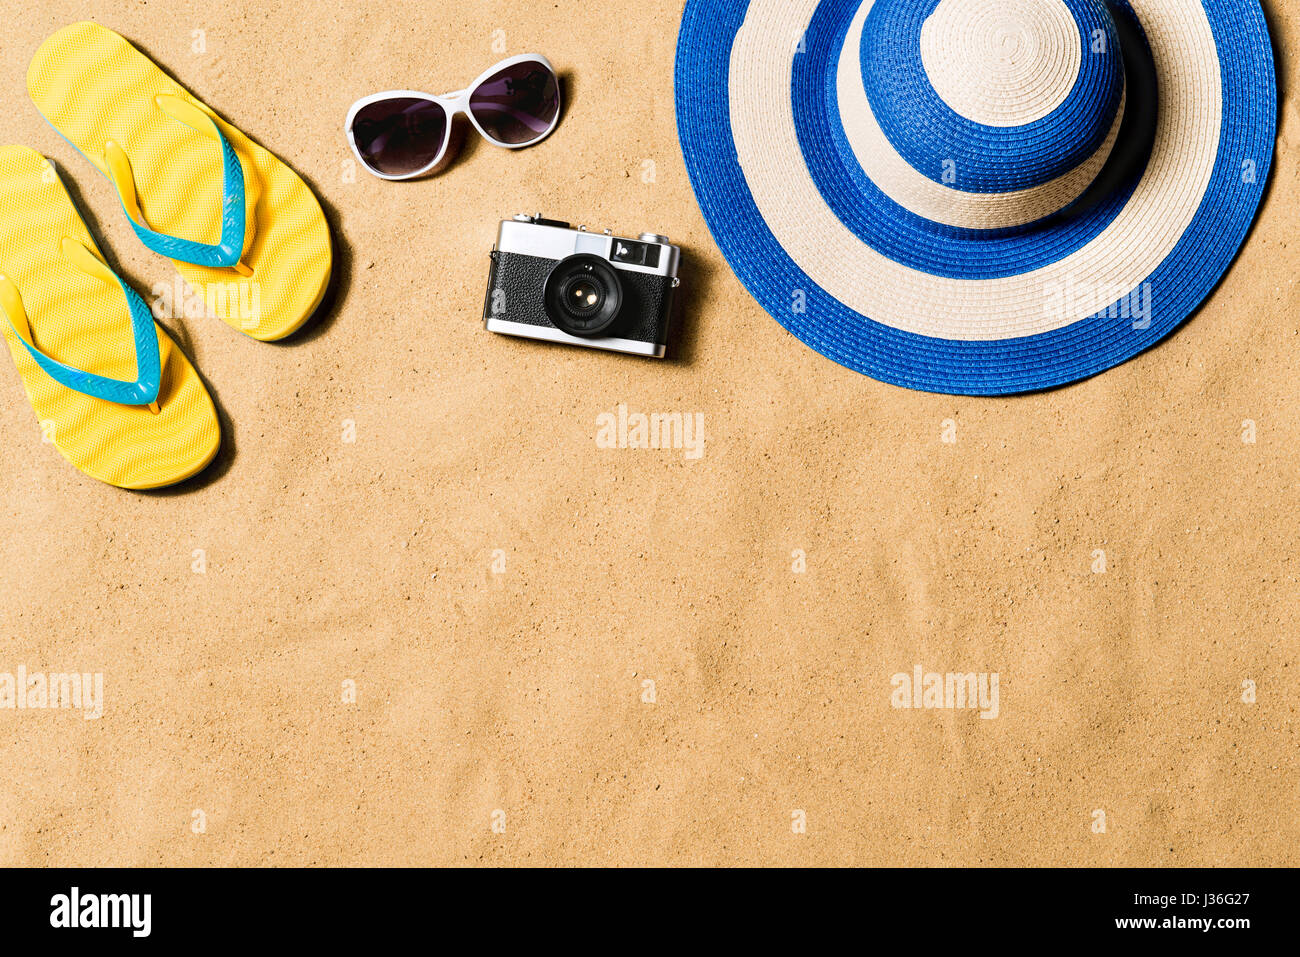 Pair of flip flop sandals, sunglasses, hat and camera. Stock Photo